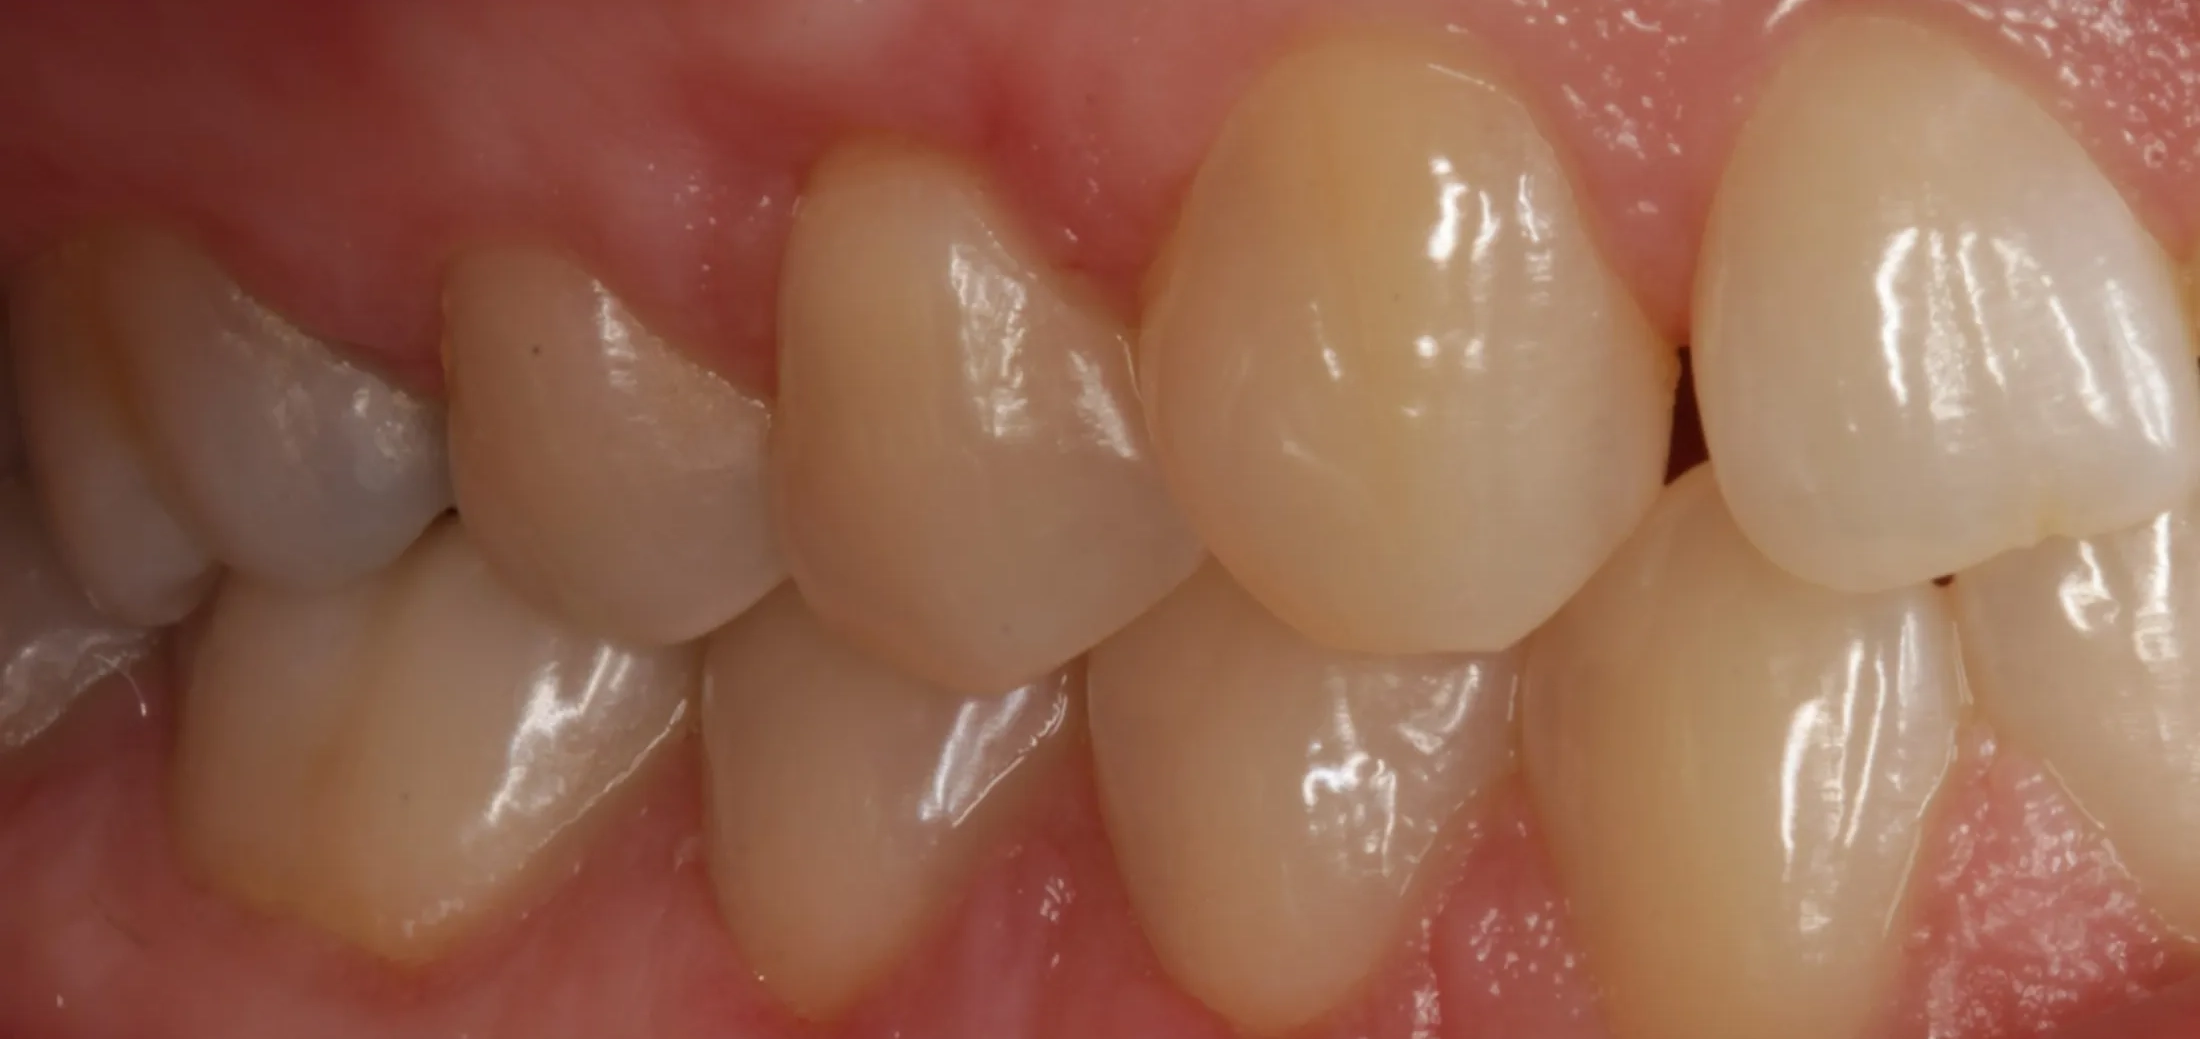 Improved gum condition visible after precise periodontal grafting.